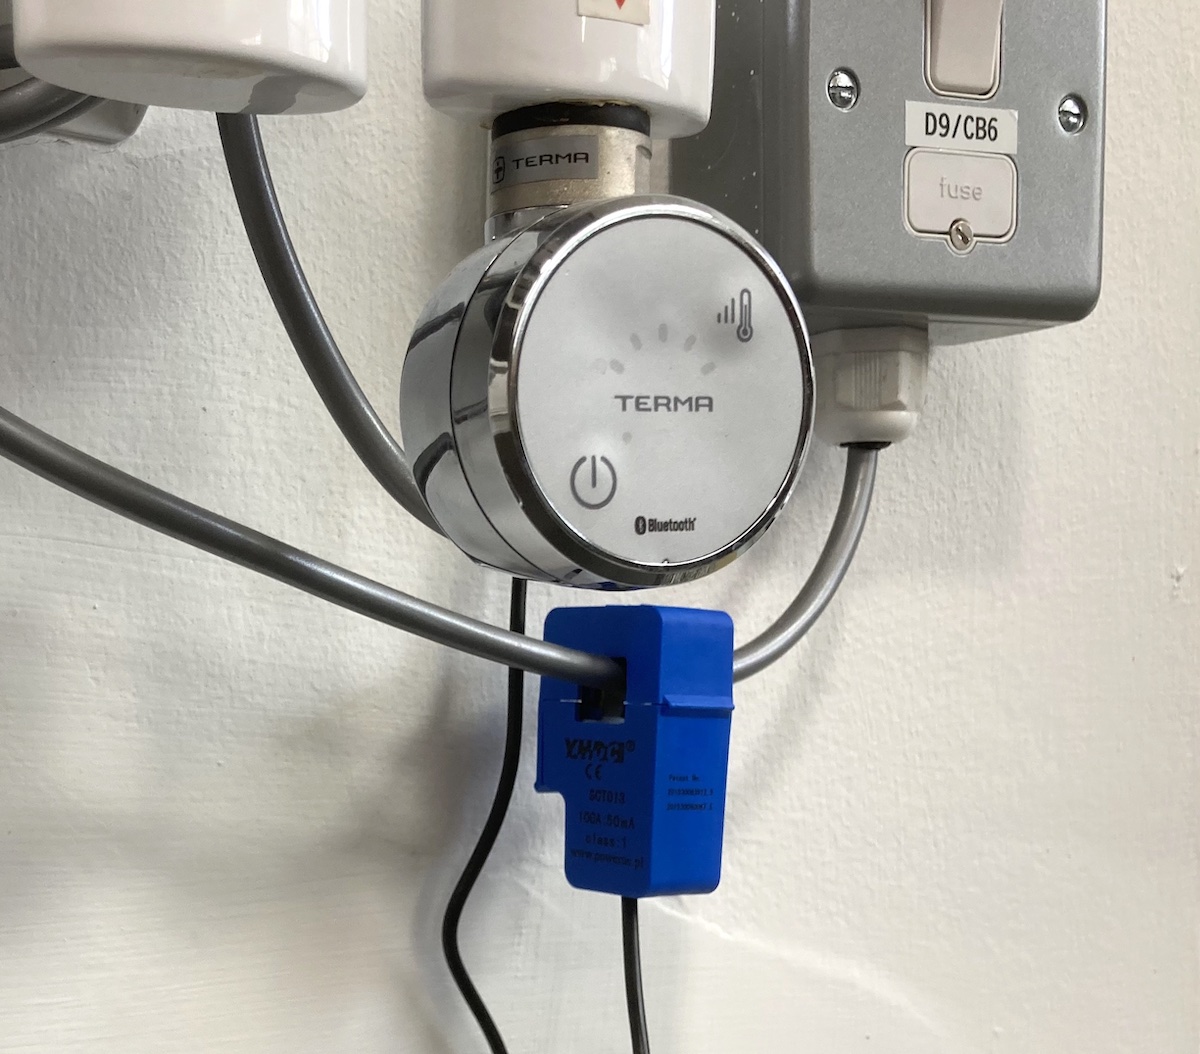 Closing the loop – electricity monitoring with Purrmetrix